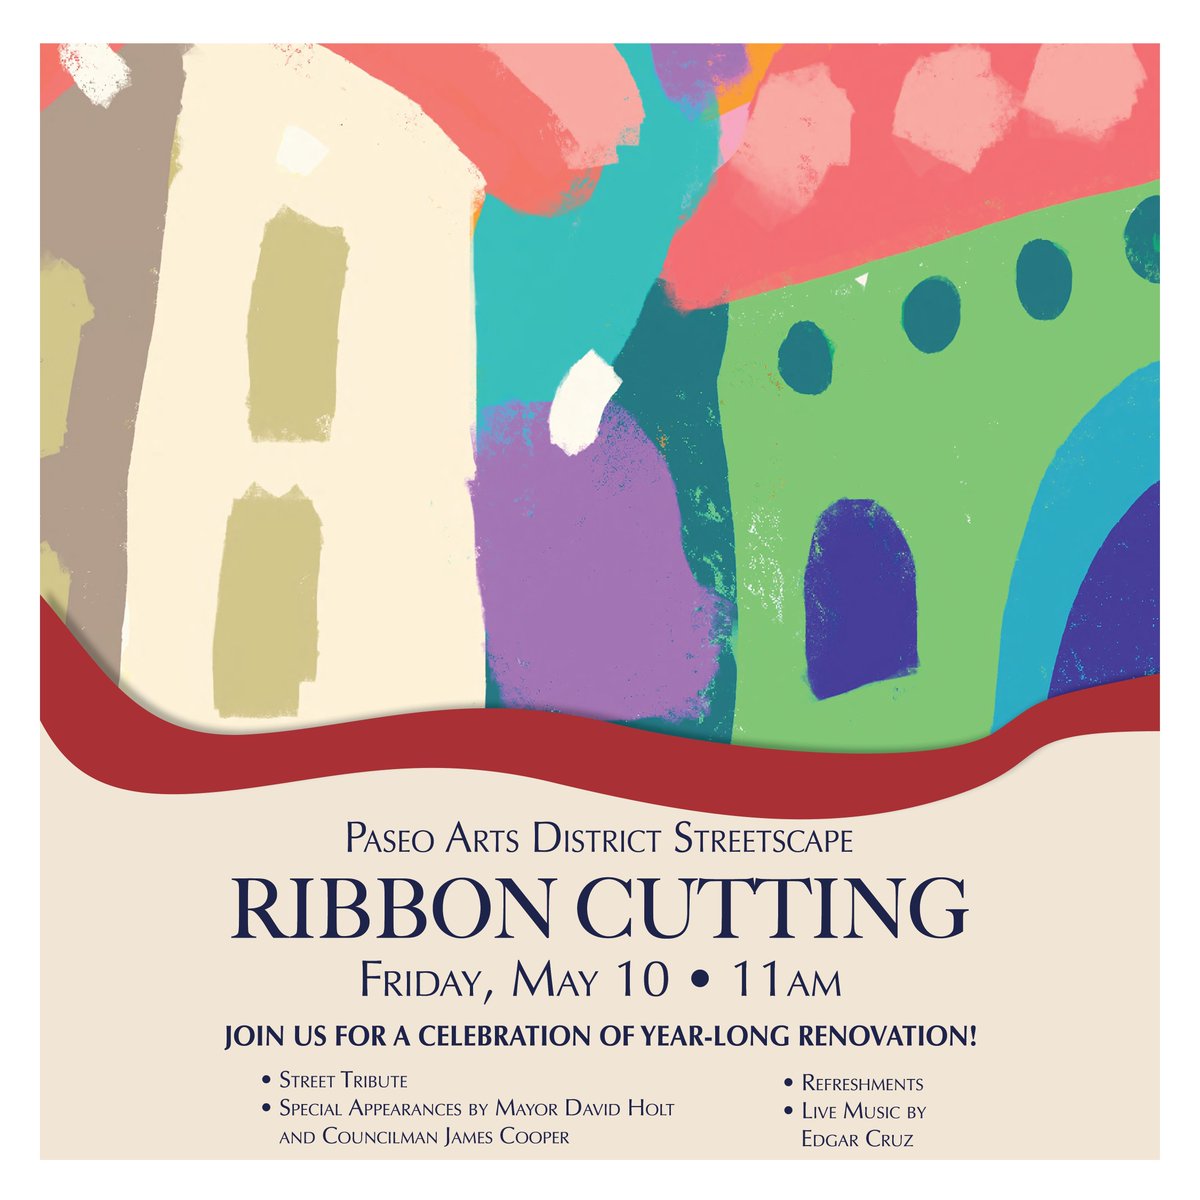 To celebrate the end of the Paseo Streetscape Project, we would like to invite you to our Ribbon Cutting Ceremony on Friday, May 10 at 11am! We'd love for you to come support the Paseo's next chapter!